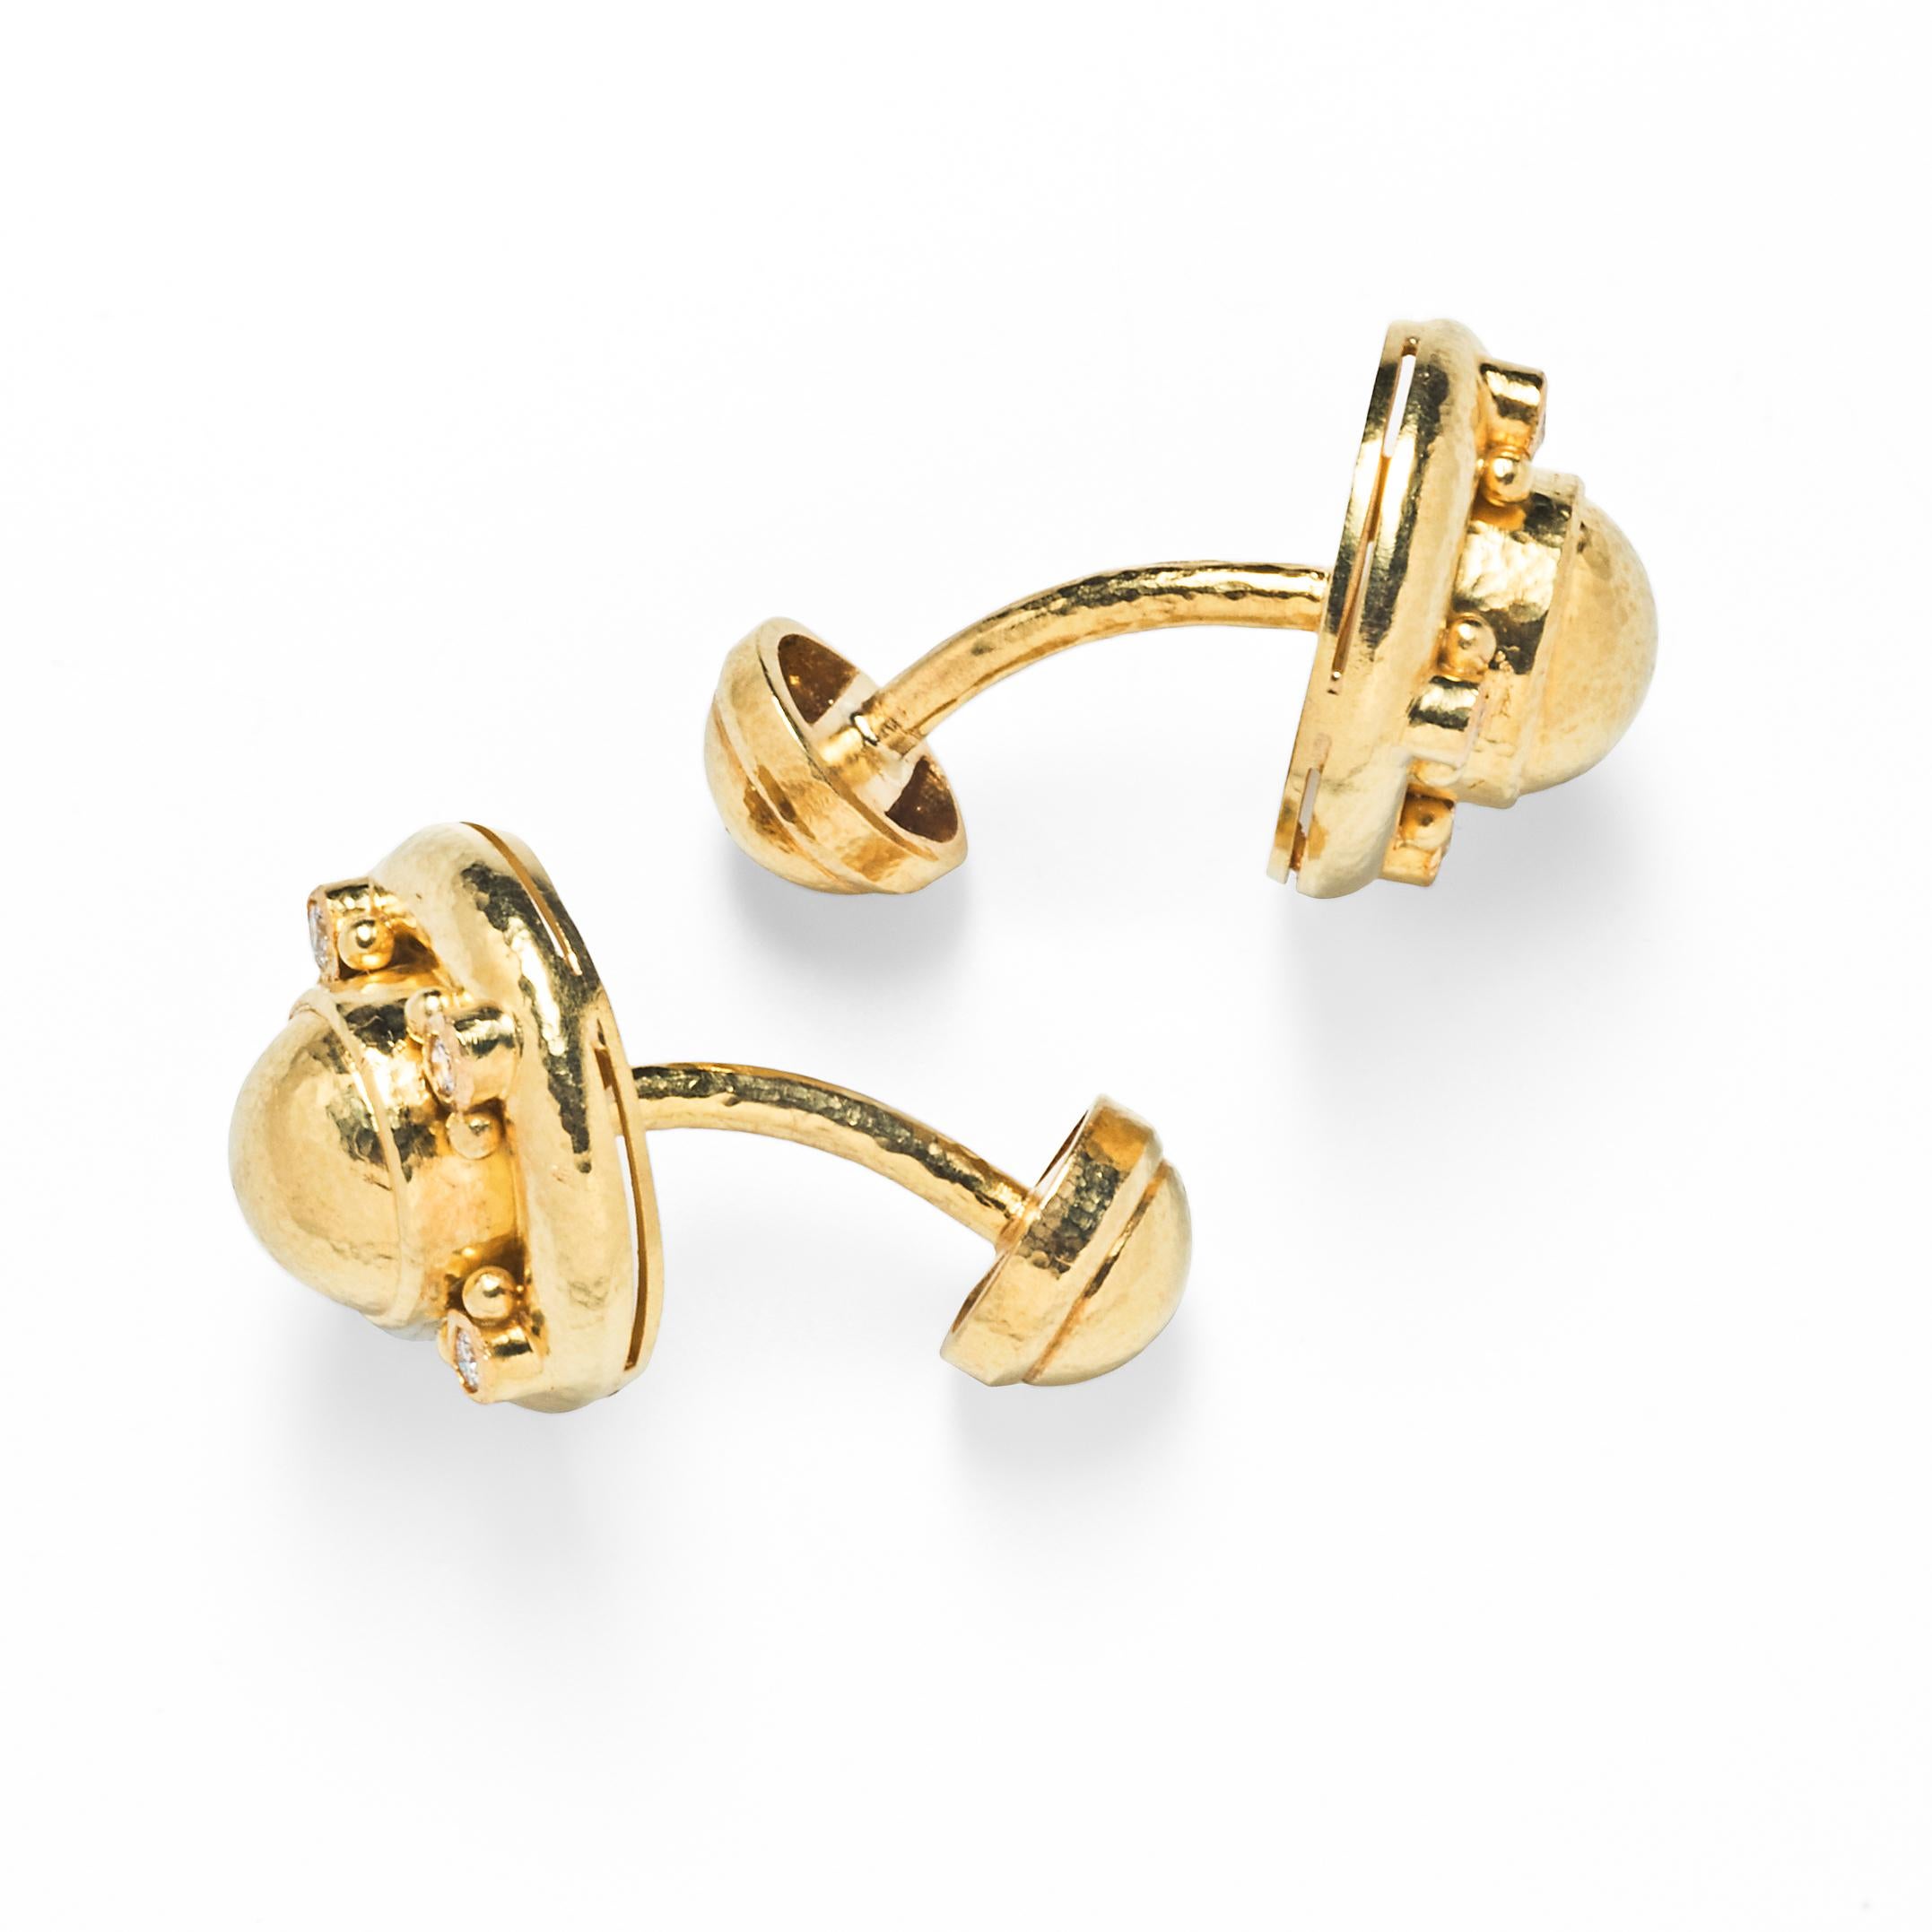 Drawing on her fascination with neo-classical designs, Elizabeth Locke injects old world glamour into her handmade jewelry. These elegant cufflinks center on hammered 19K gold domes set within bombé frames highlighted by collet-set round diamonds.